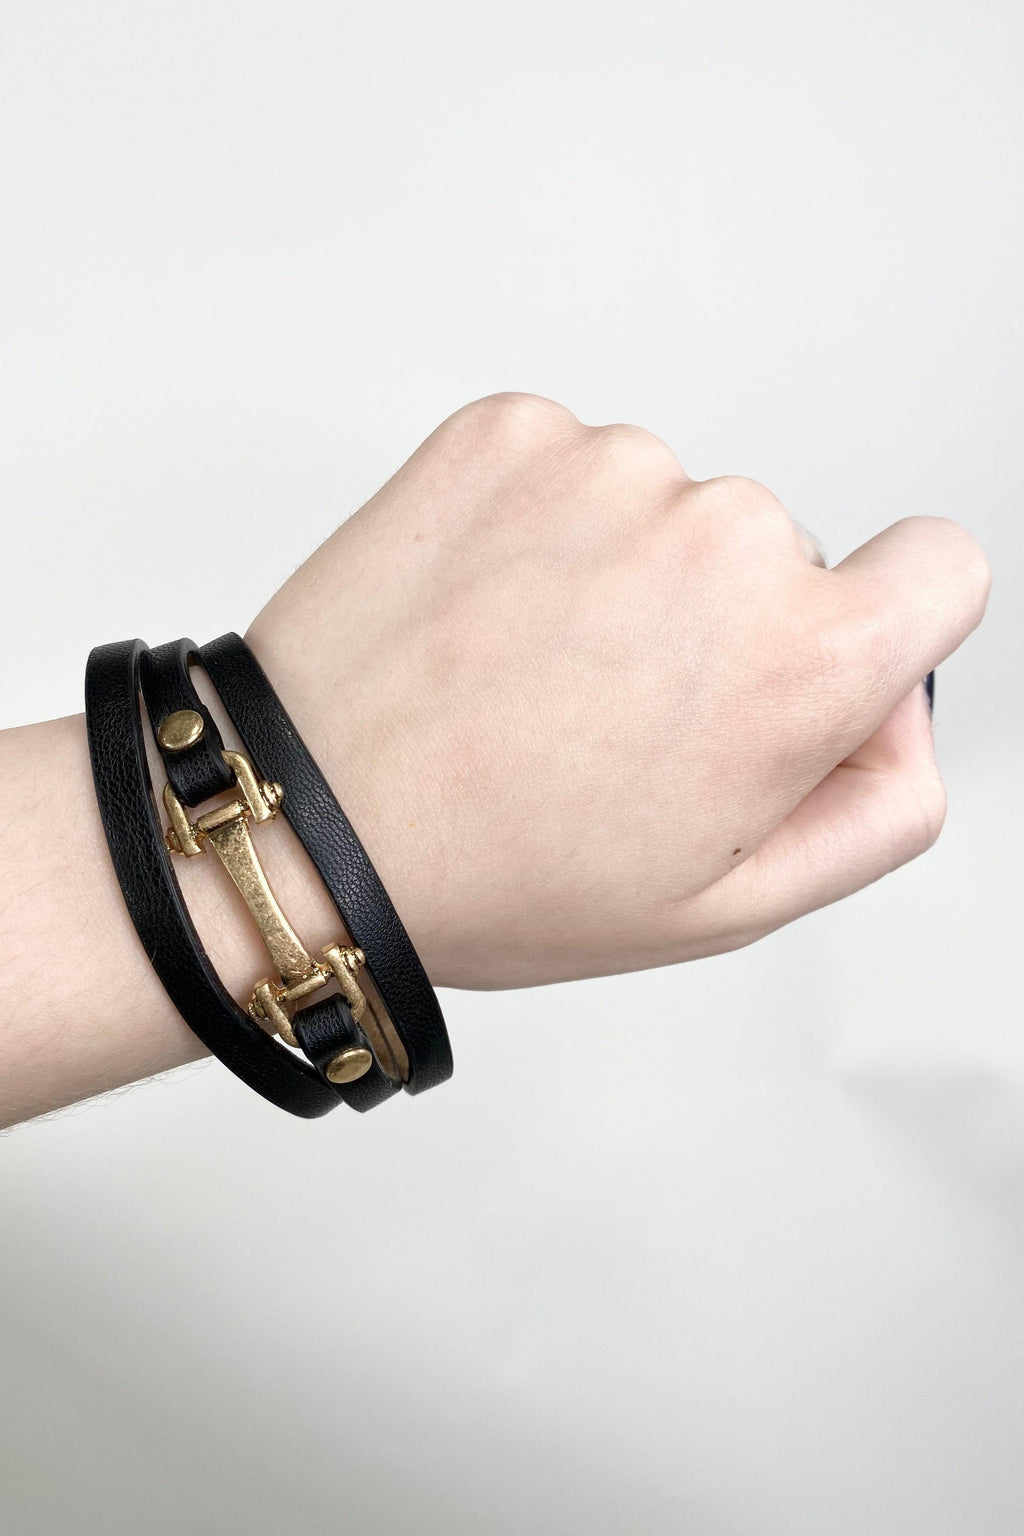 Opposites Attract- {Black, Brown, Natural} Magnetic Bracelet w/ Gold